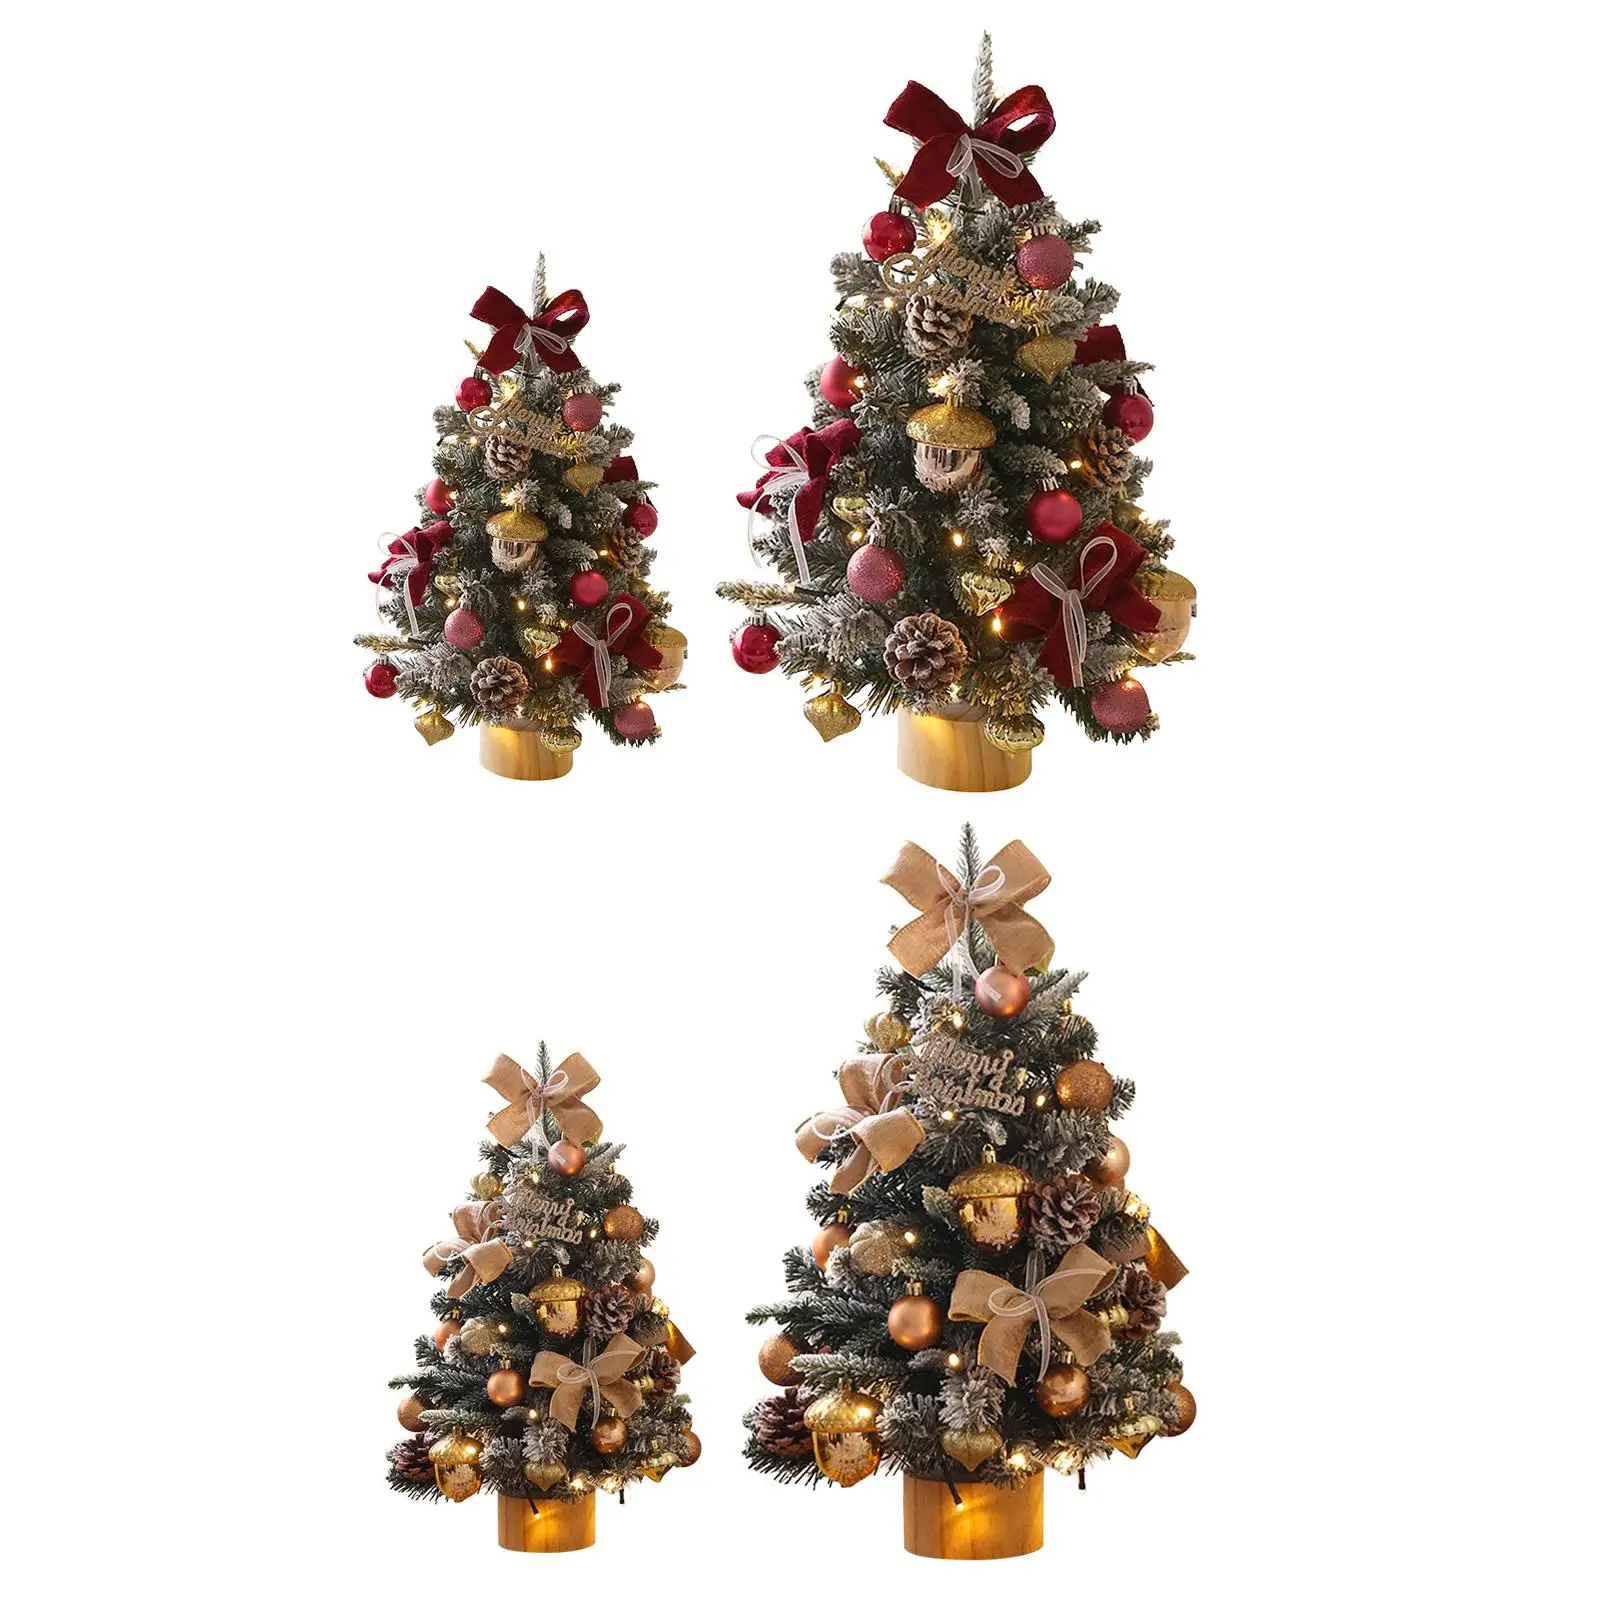 Artificial Christmas Tree with Lights Mini Xmas Tree for Bedroom Dinning Room Tabletop Centerpieces Living Room Shop Window